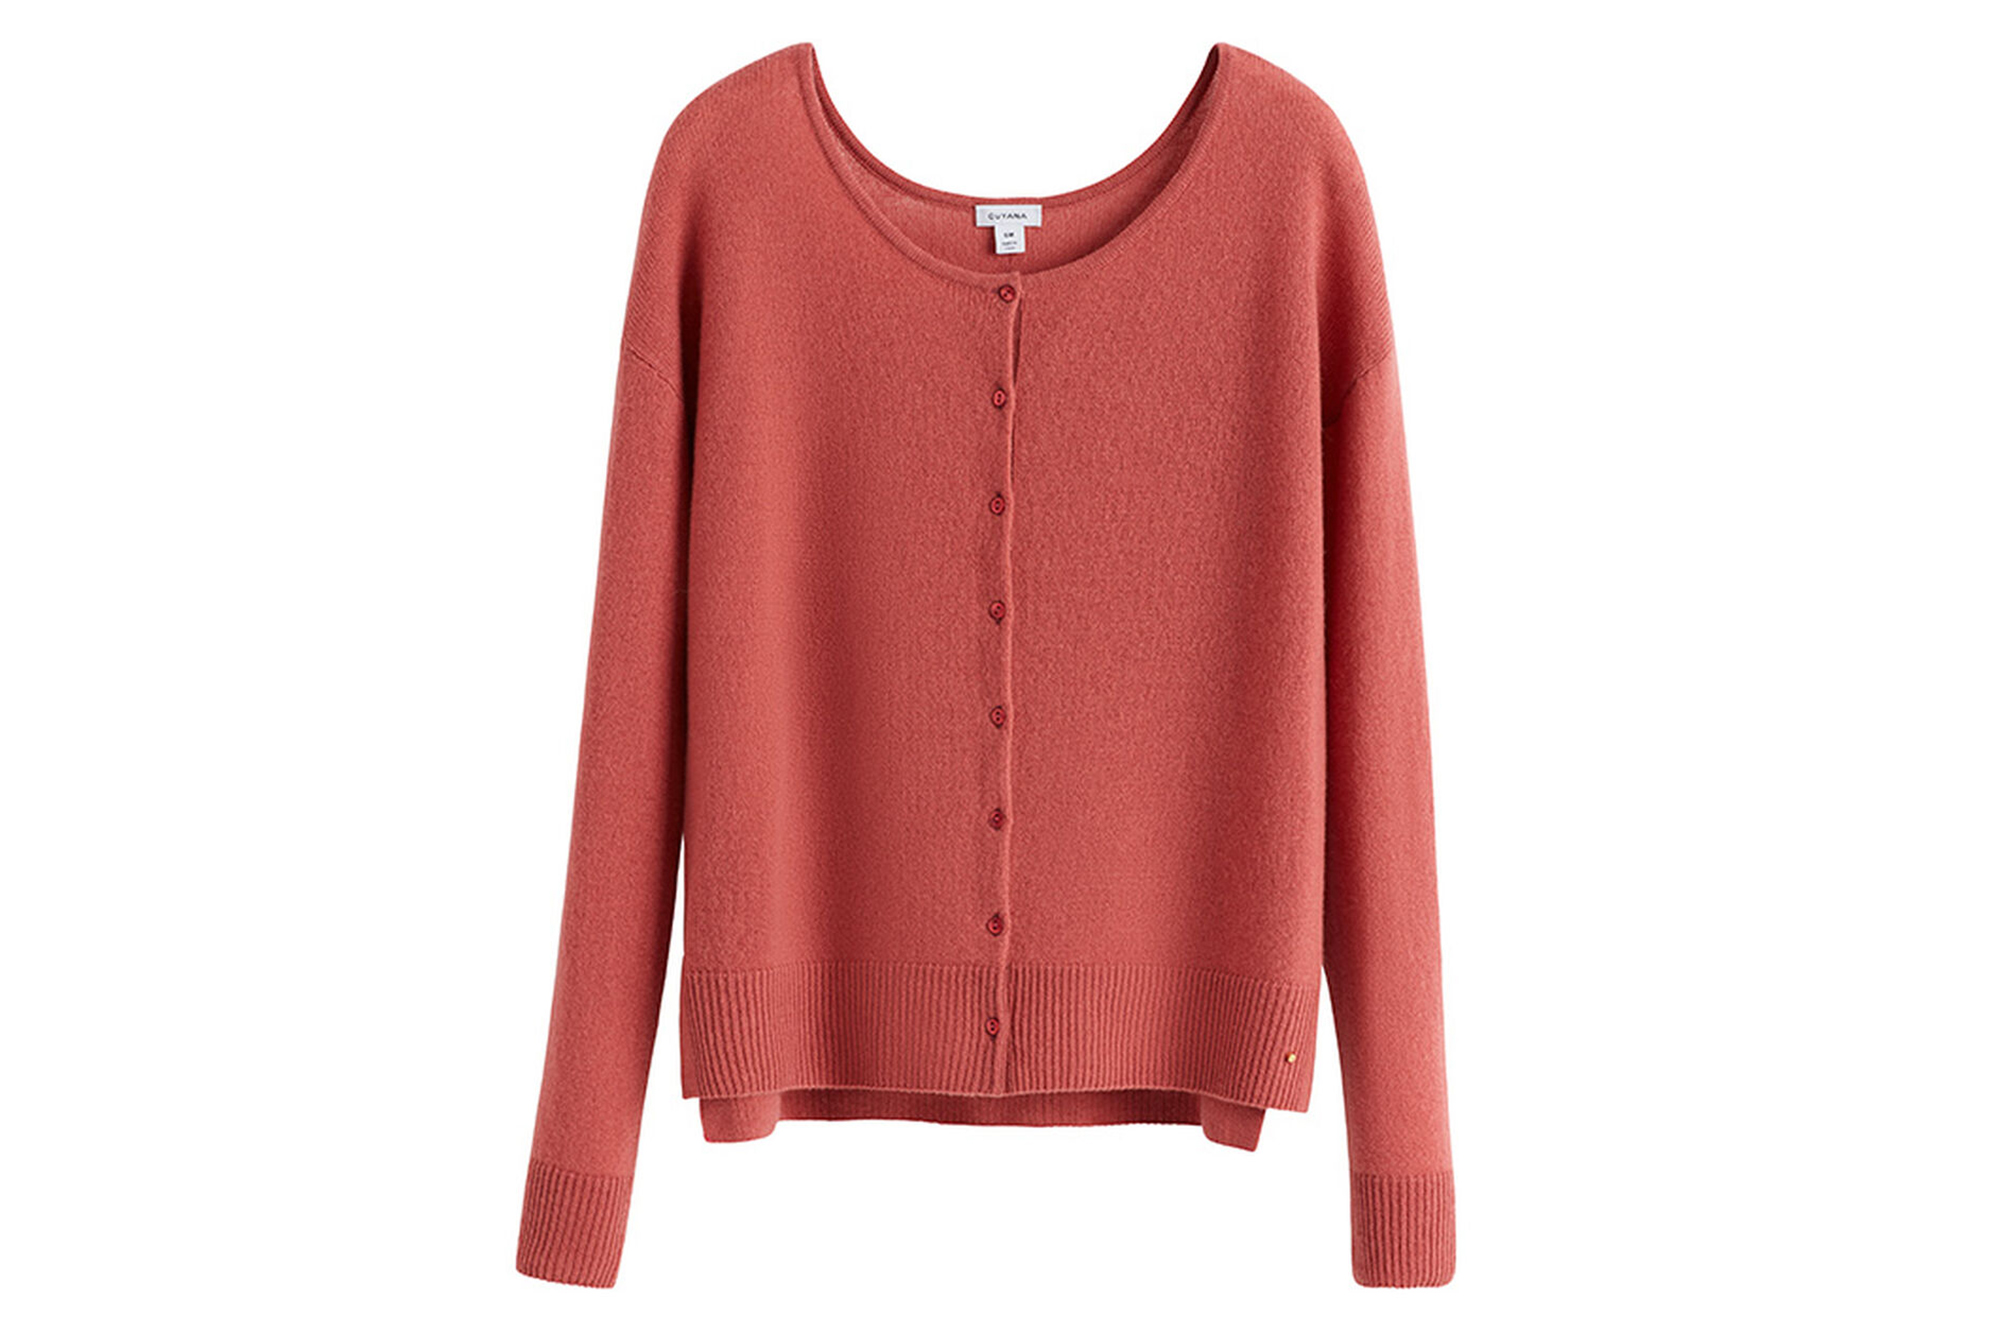 A light pink salmon colored sweater 